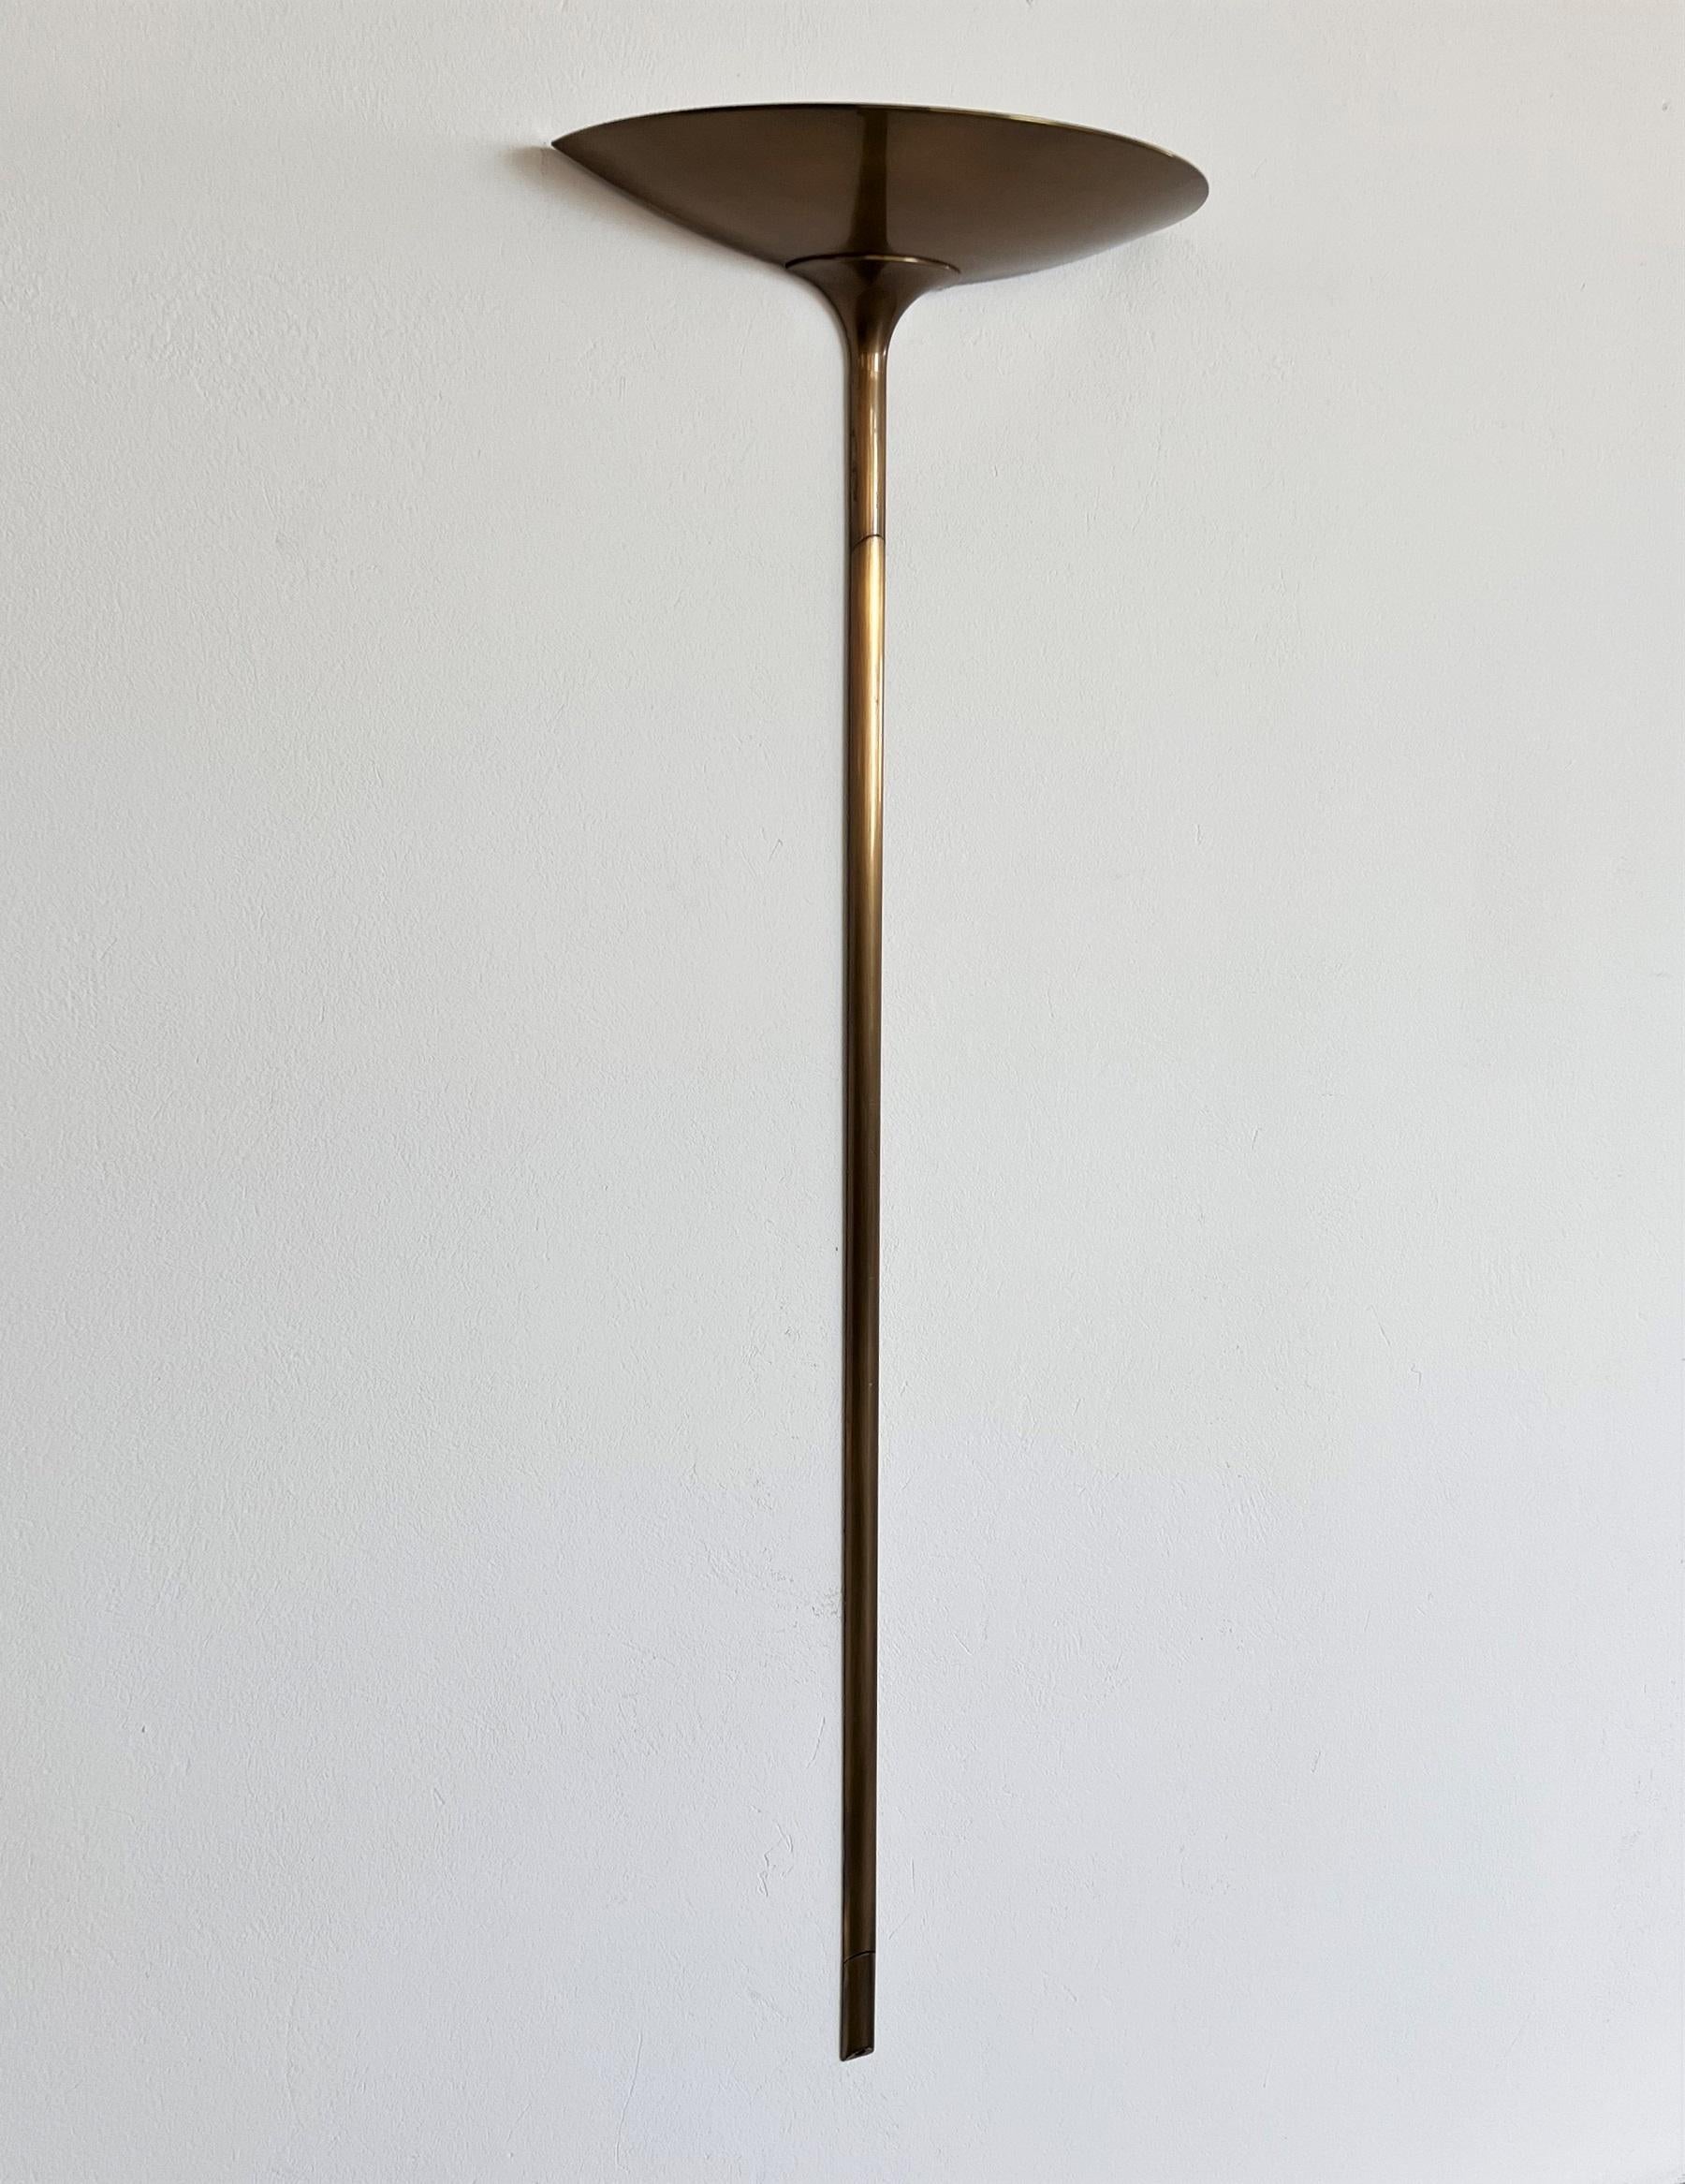 Mid-Century Modern Florian Schulz Vintage Wall Sconce in Brushed Brass, 1970s For Sale